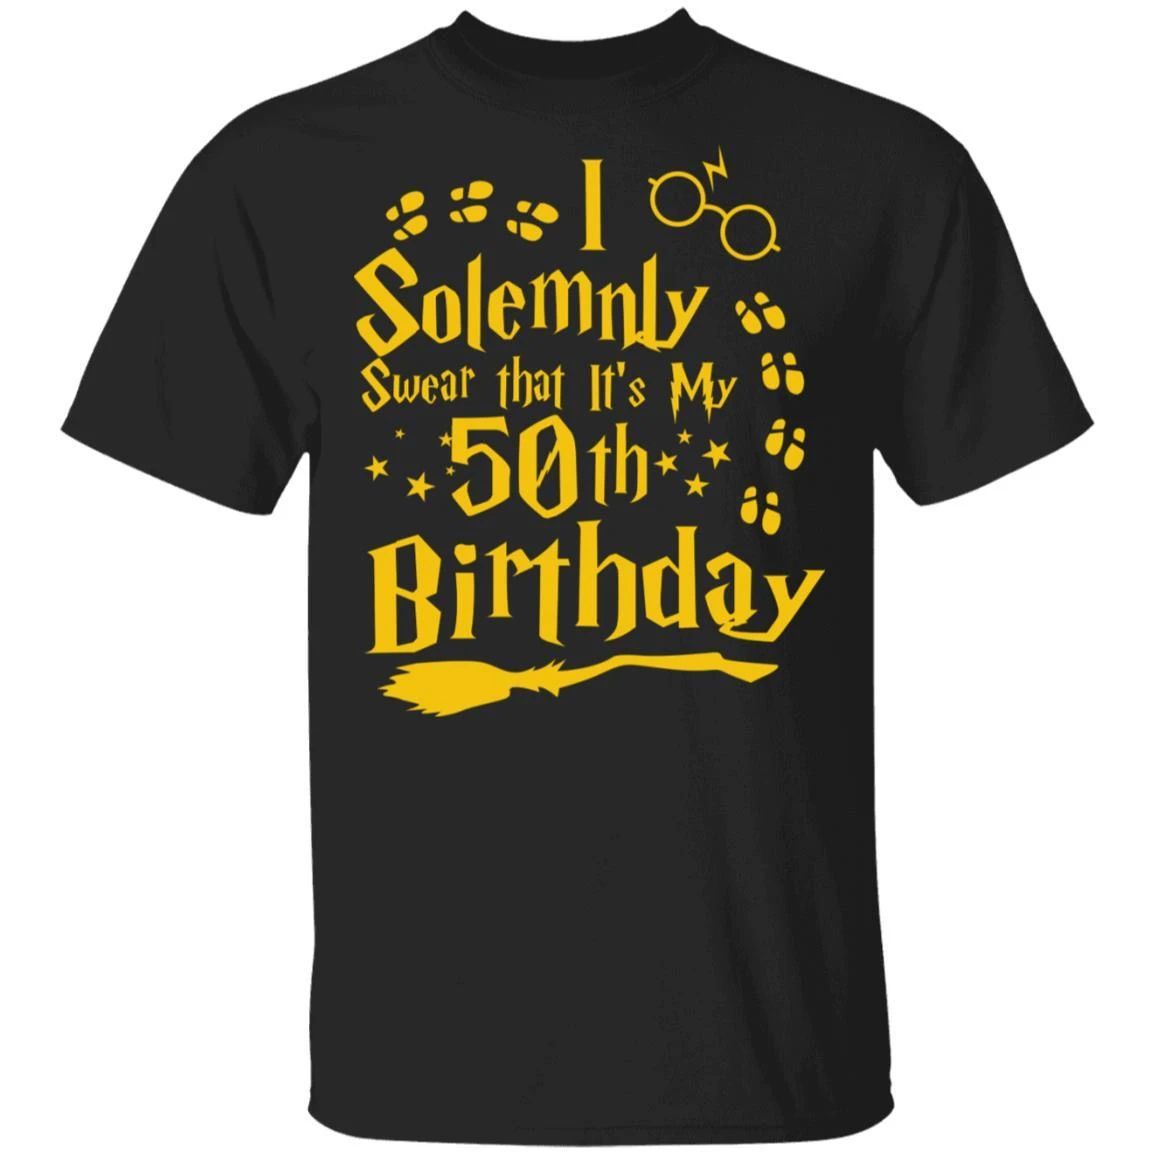 I Solemnly Swear That It’s My 50th Birthday T-shirt Harry Potter Tee